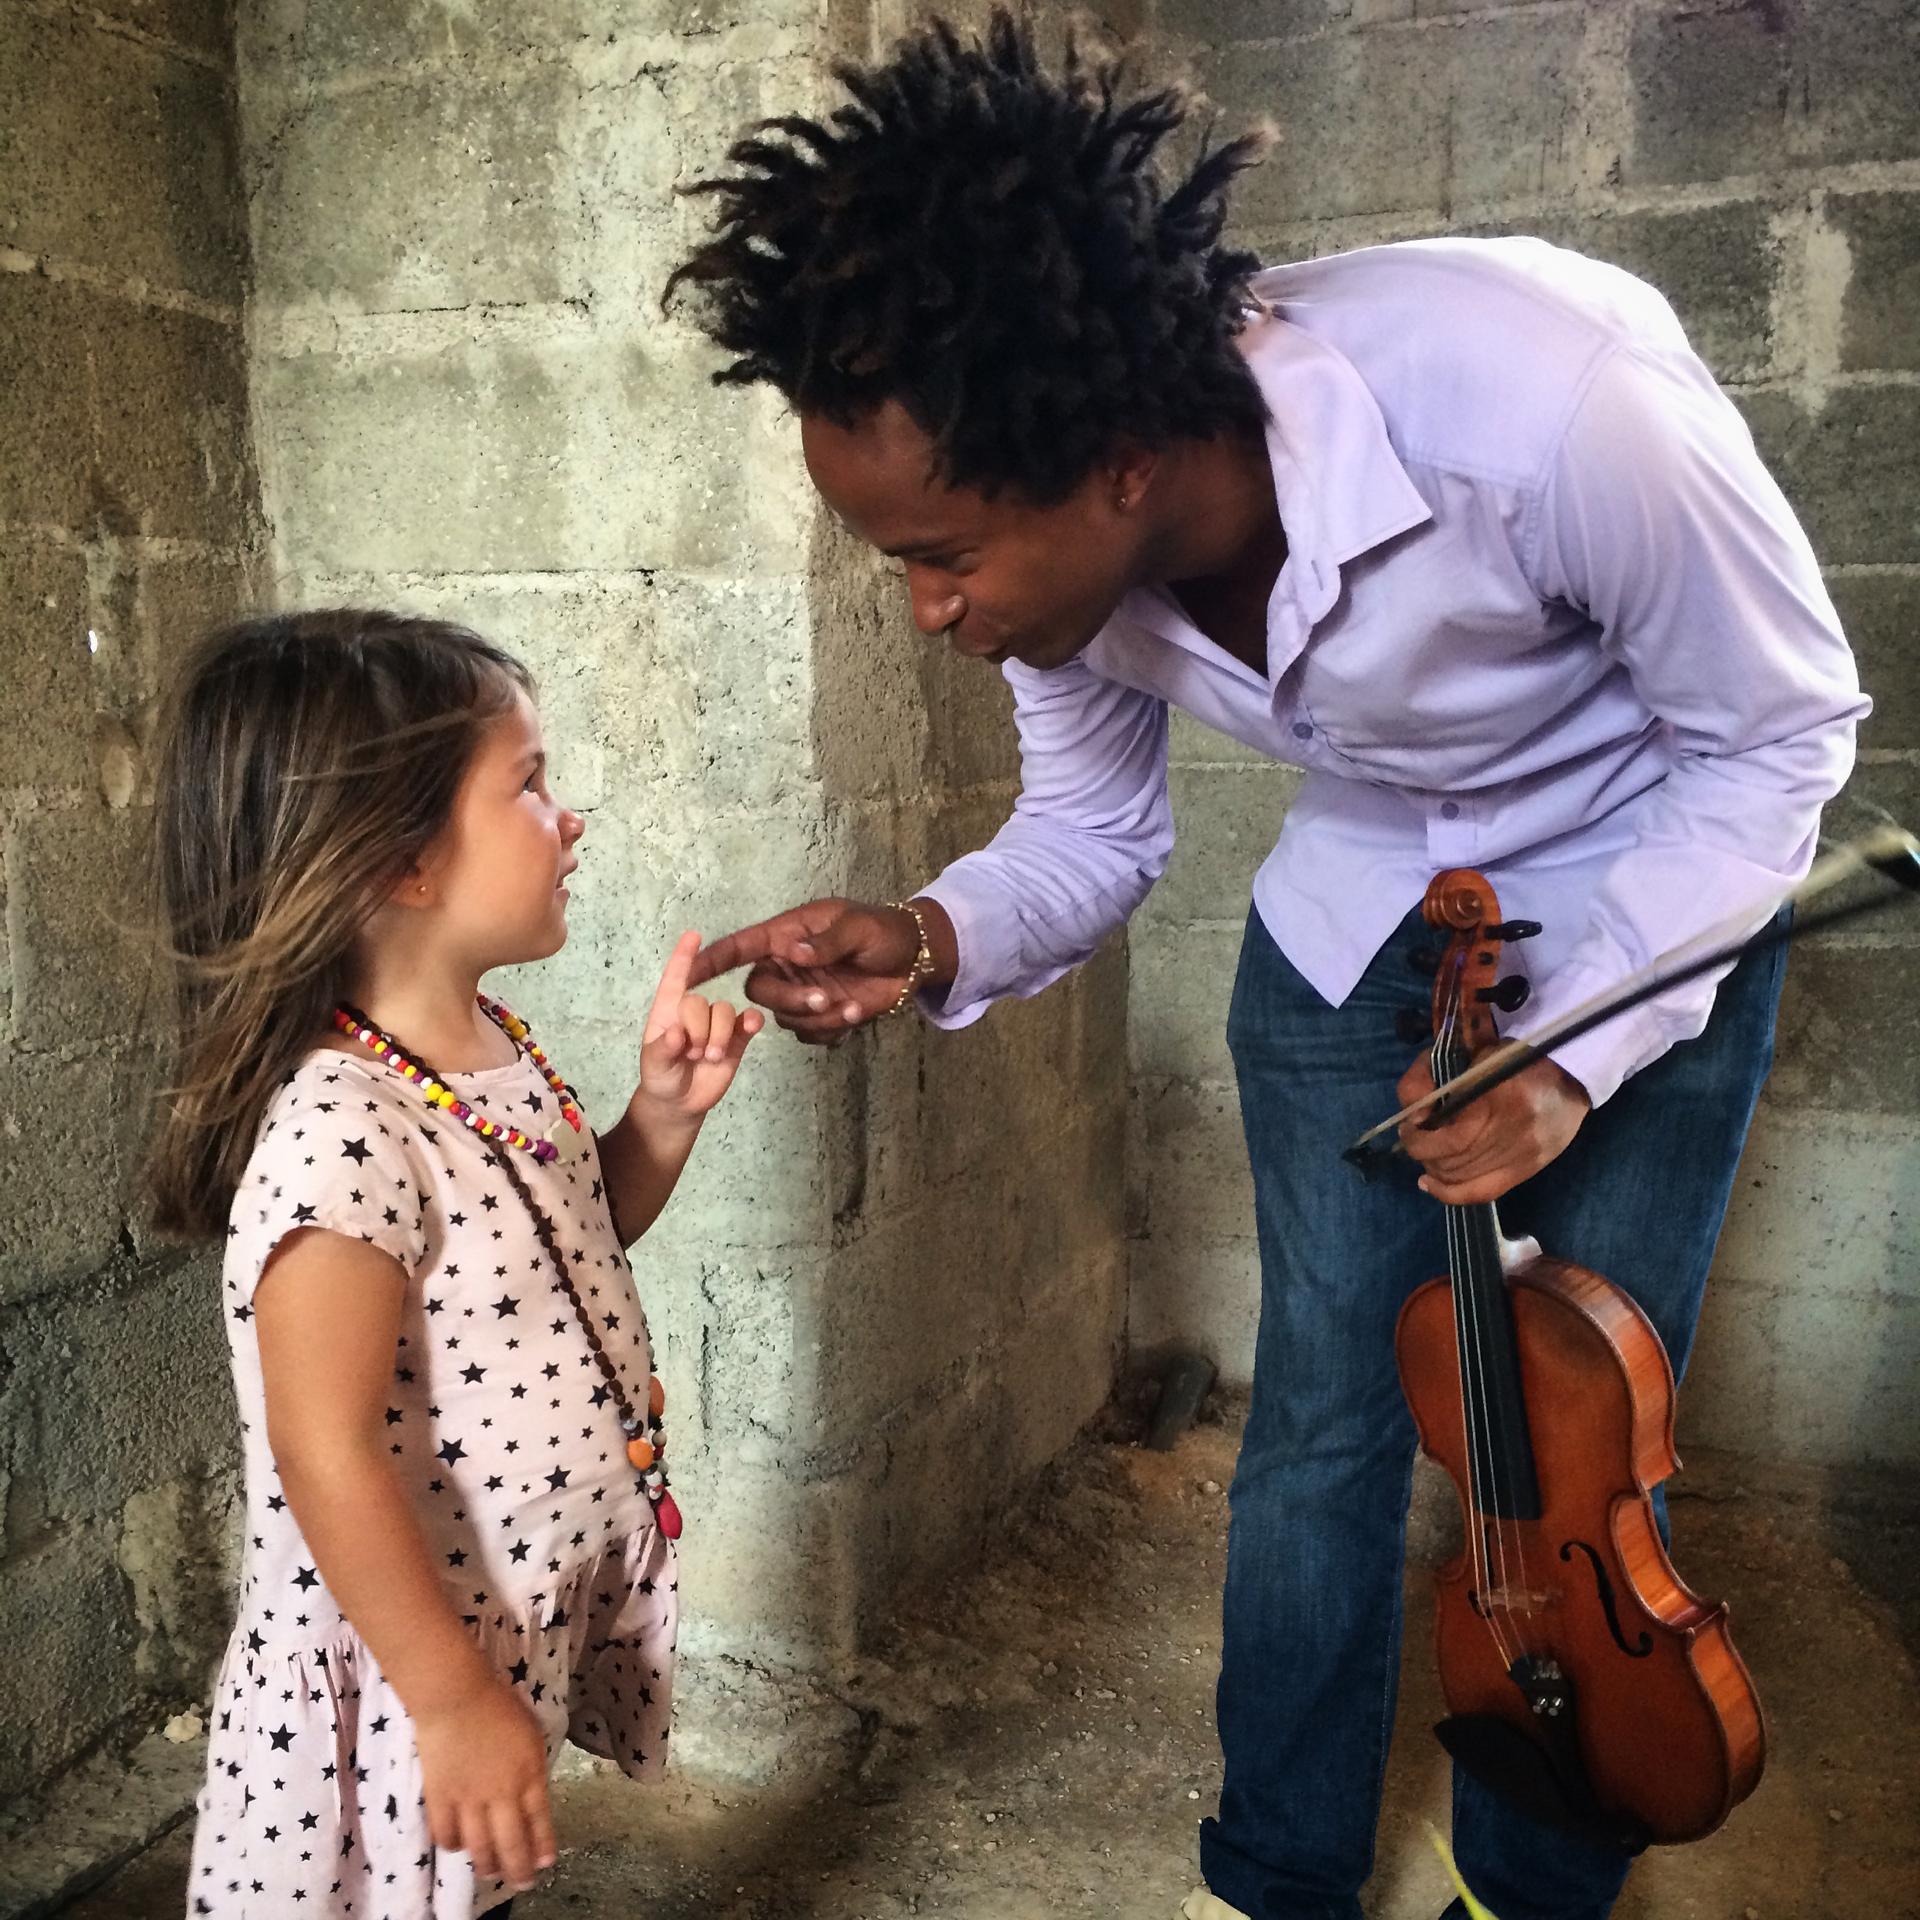 Violinist Alejandro Junco chats with a young classical music fan at an art exhibition in Havana. He's a graduate of Cuba's prestigious arts school, Instituto Superior de Arte (ISA). I met Alejandro as he played solo violin inside the ruins of an old build